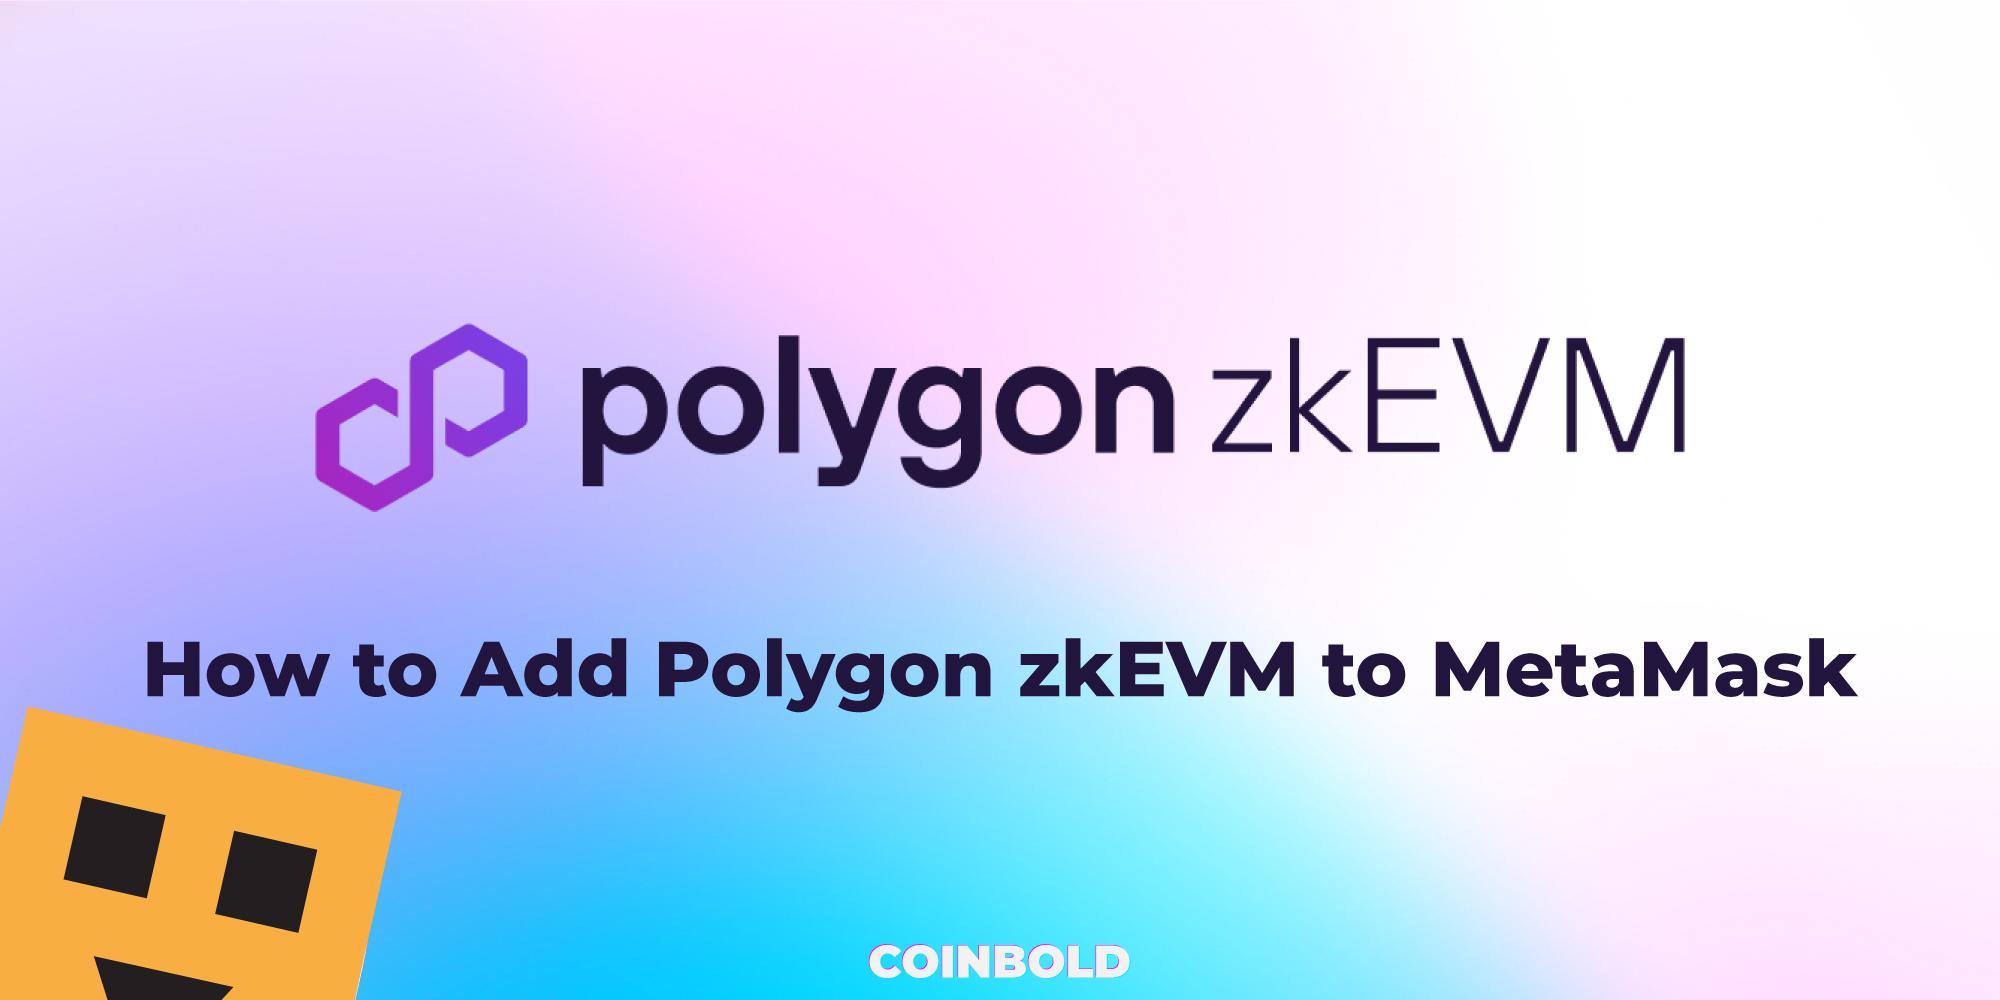 How to Add Polygon zkEVM to MetaMask